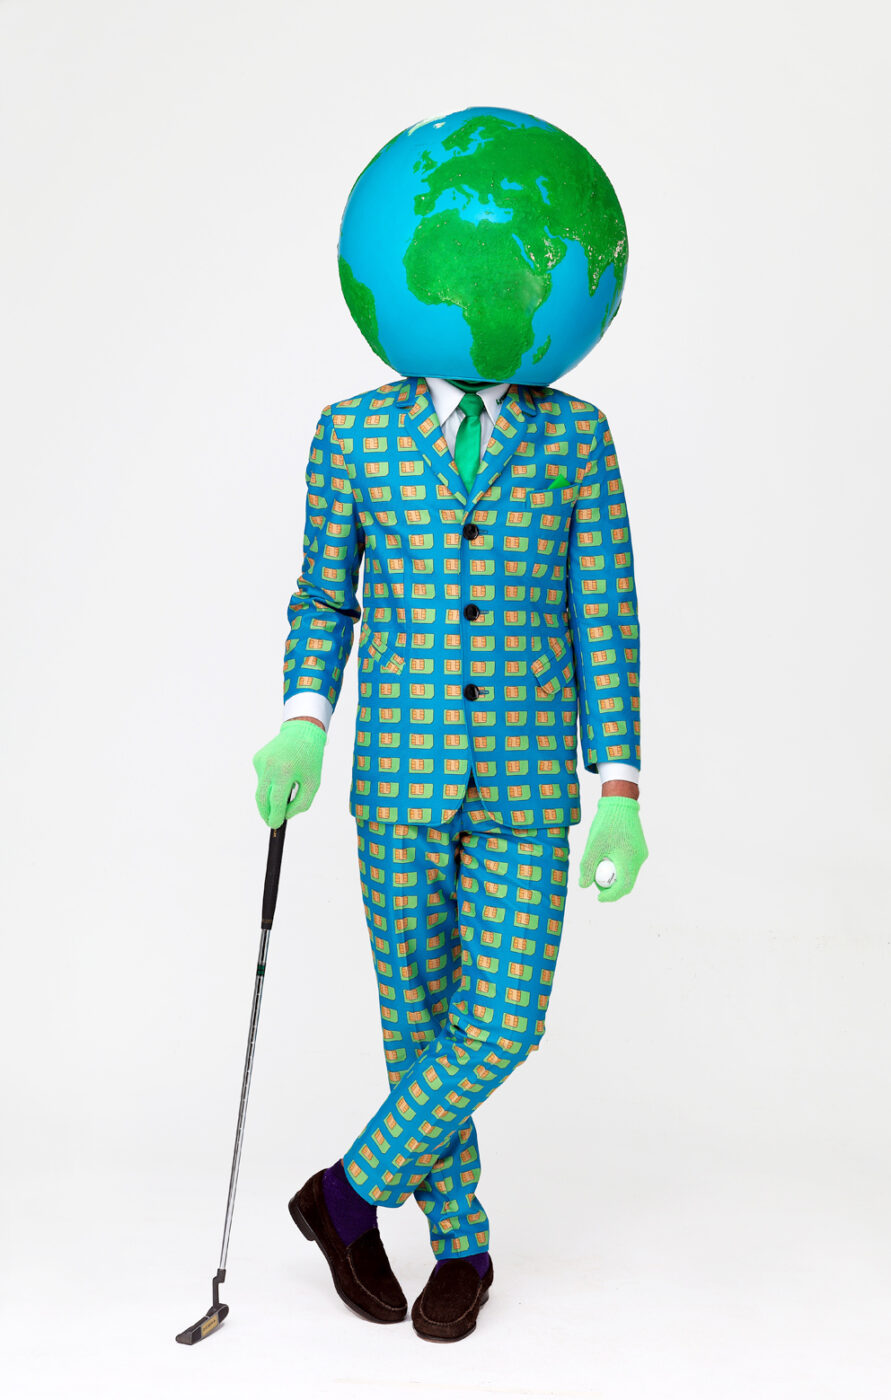 Lycamobile mascot man with a world globe on his head and golf club and ball in hands Publicity image by Ross Vincent Photography